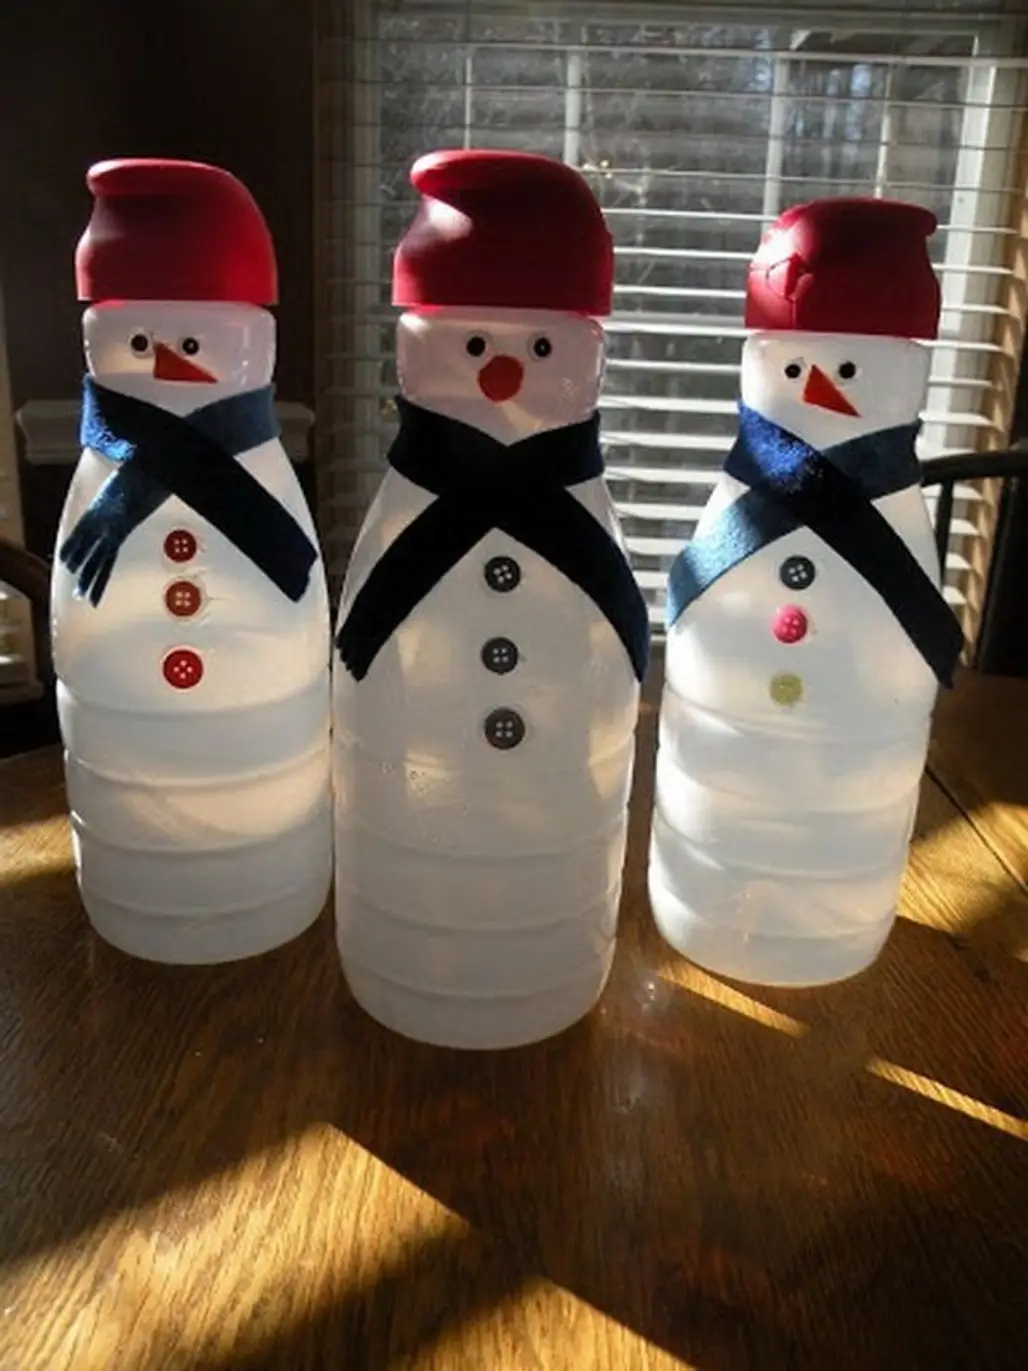 Snowmen from Coffee Creamer Containers,